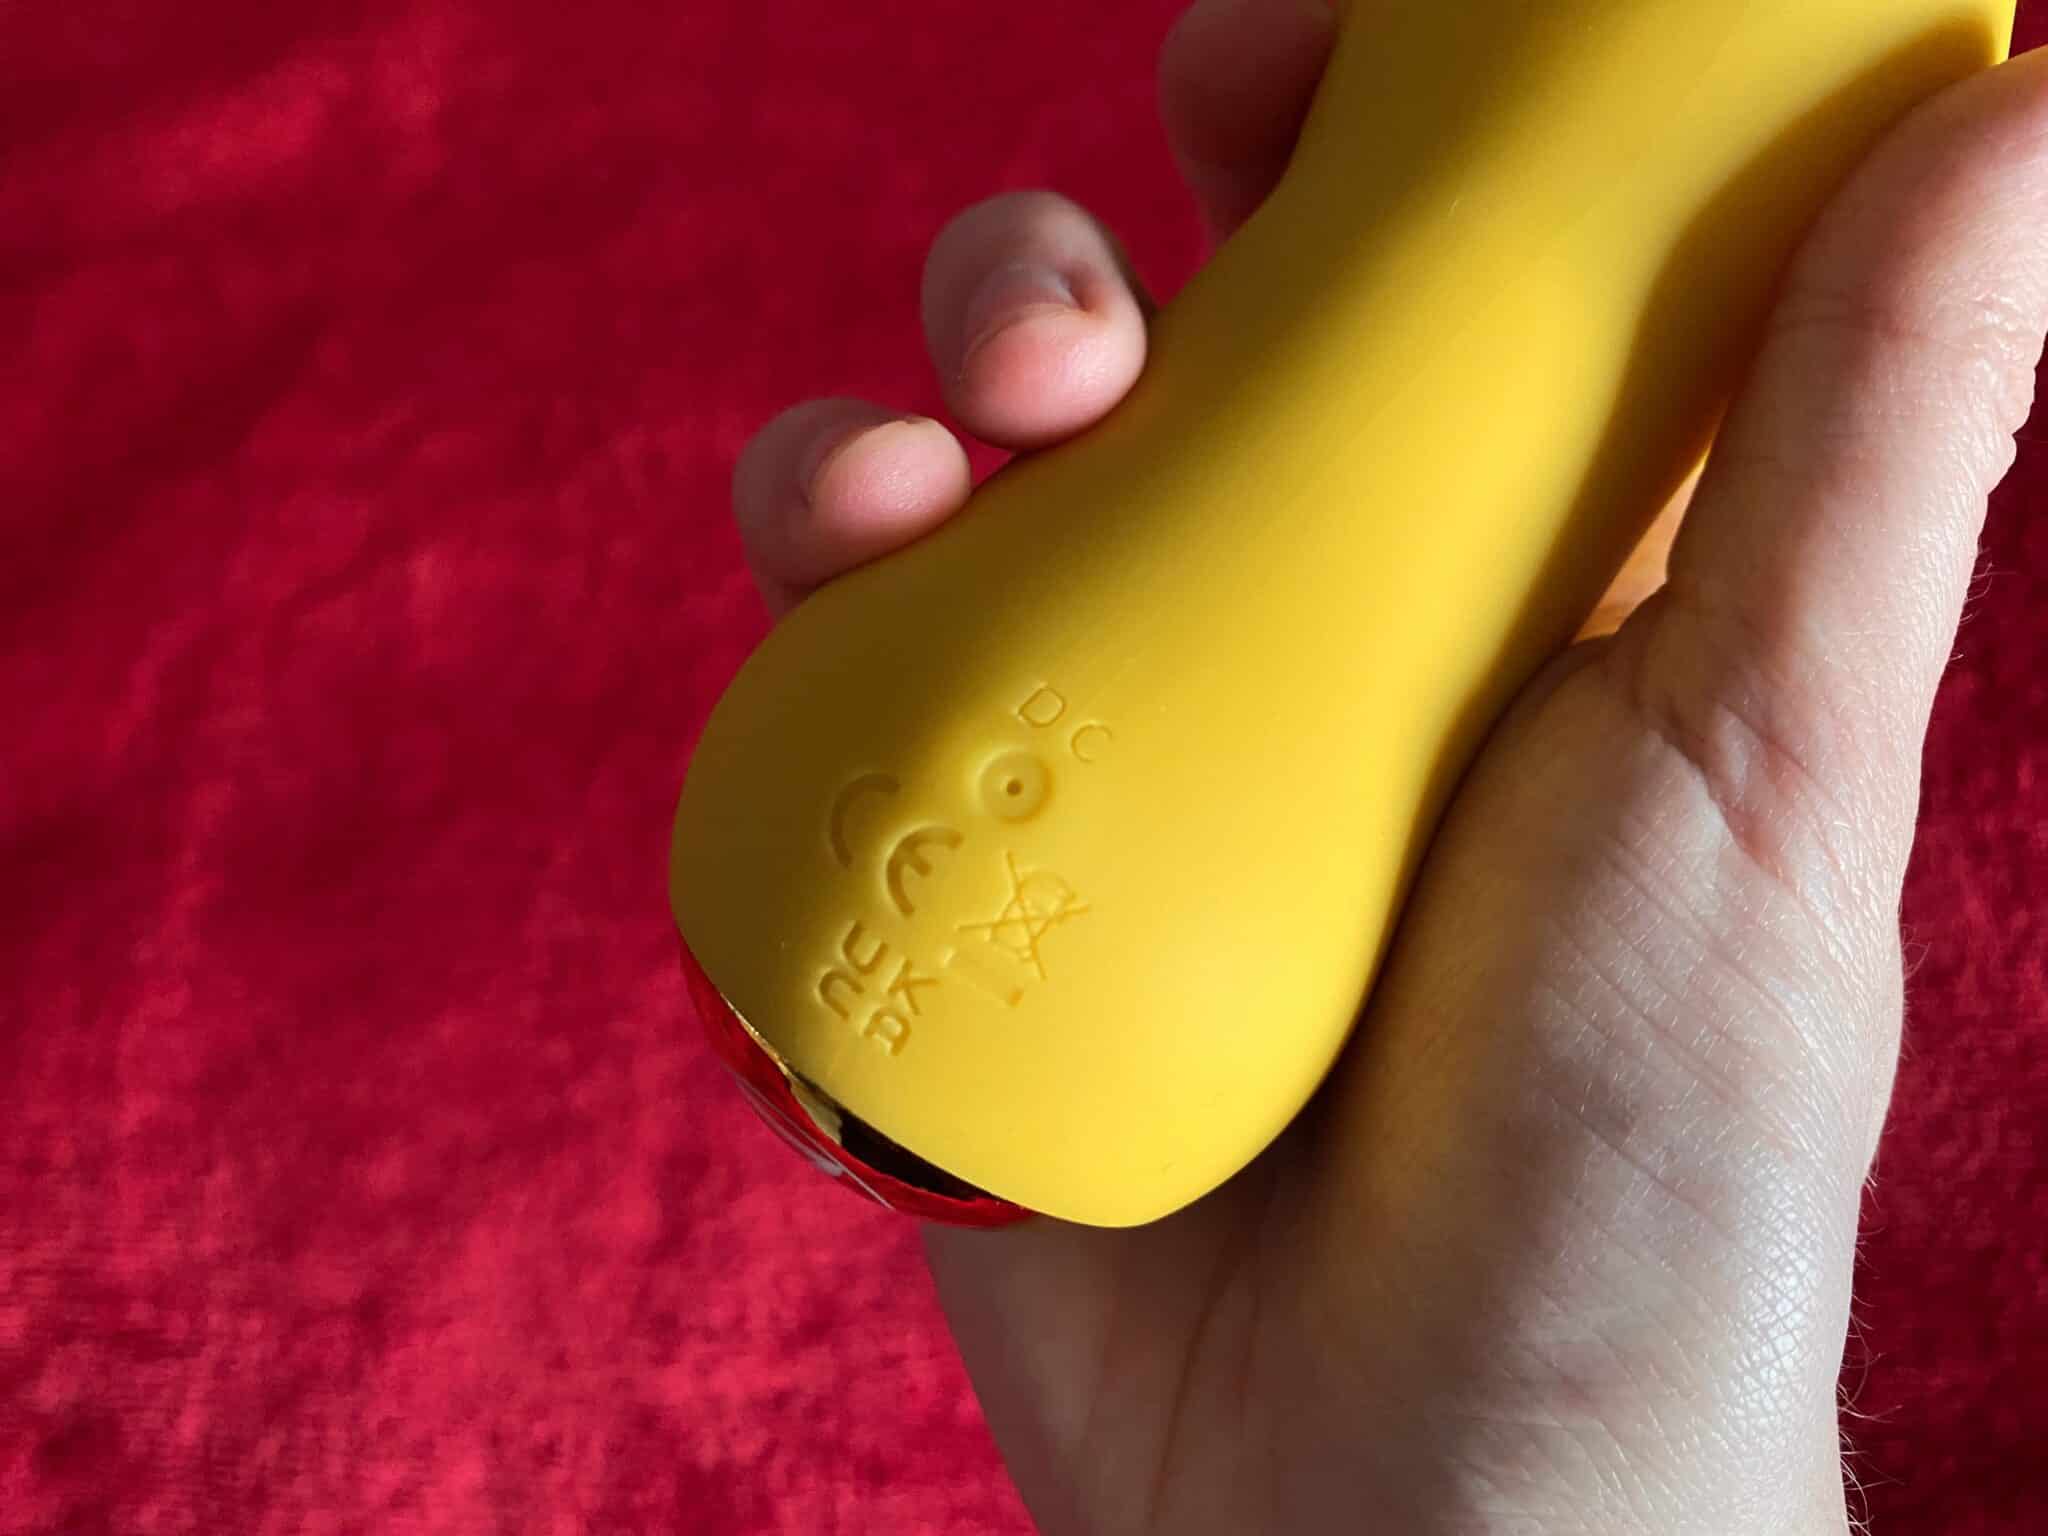 Your New Favorite Double Vibrator The Performance of the Your New Favorite Double Vibrator